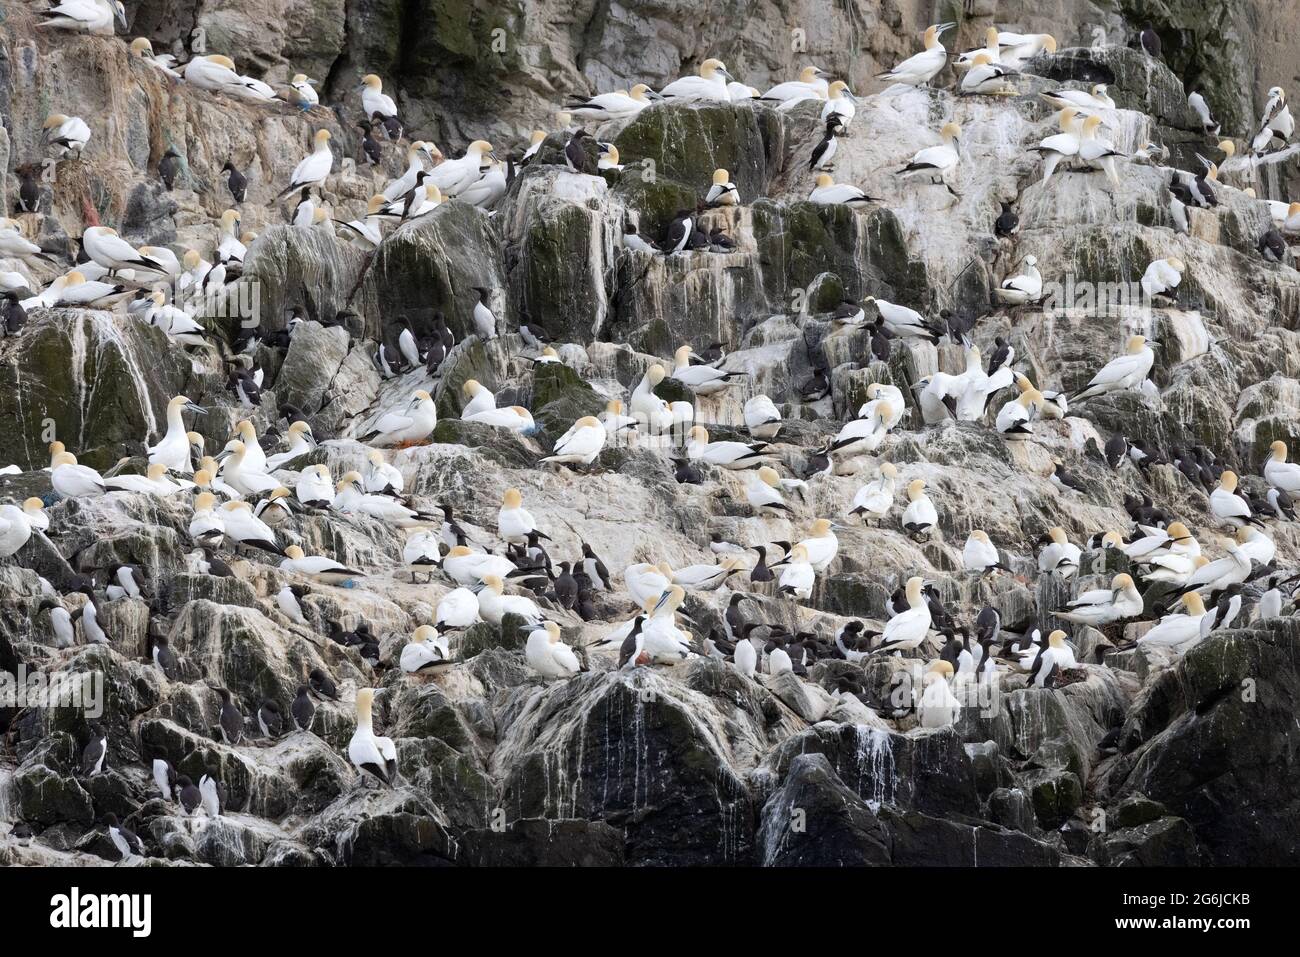 Grassholm Island, Wales, off the coast of Pembrokeshire, an uninhabited isle with a large Gannet colony, Morus bassanus, covering much of it; Wales UK Stock Photo